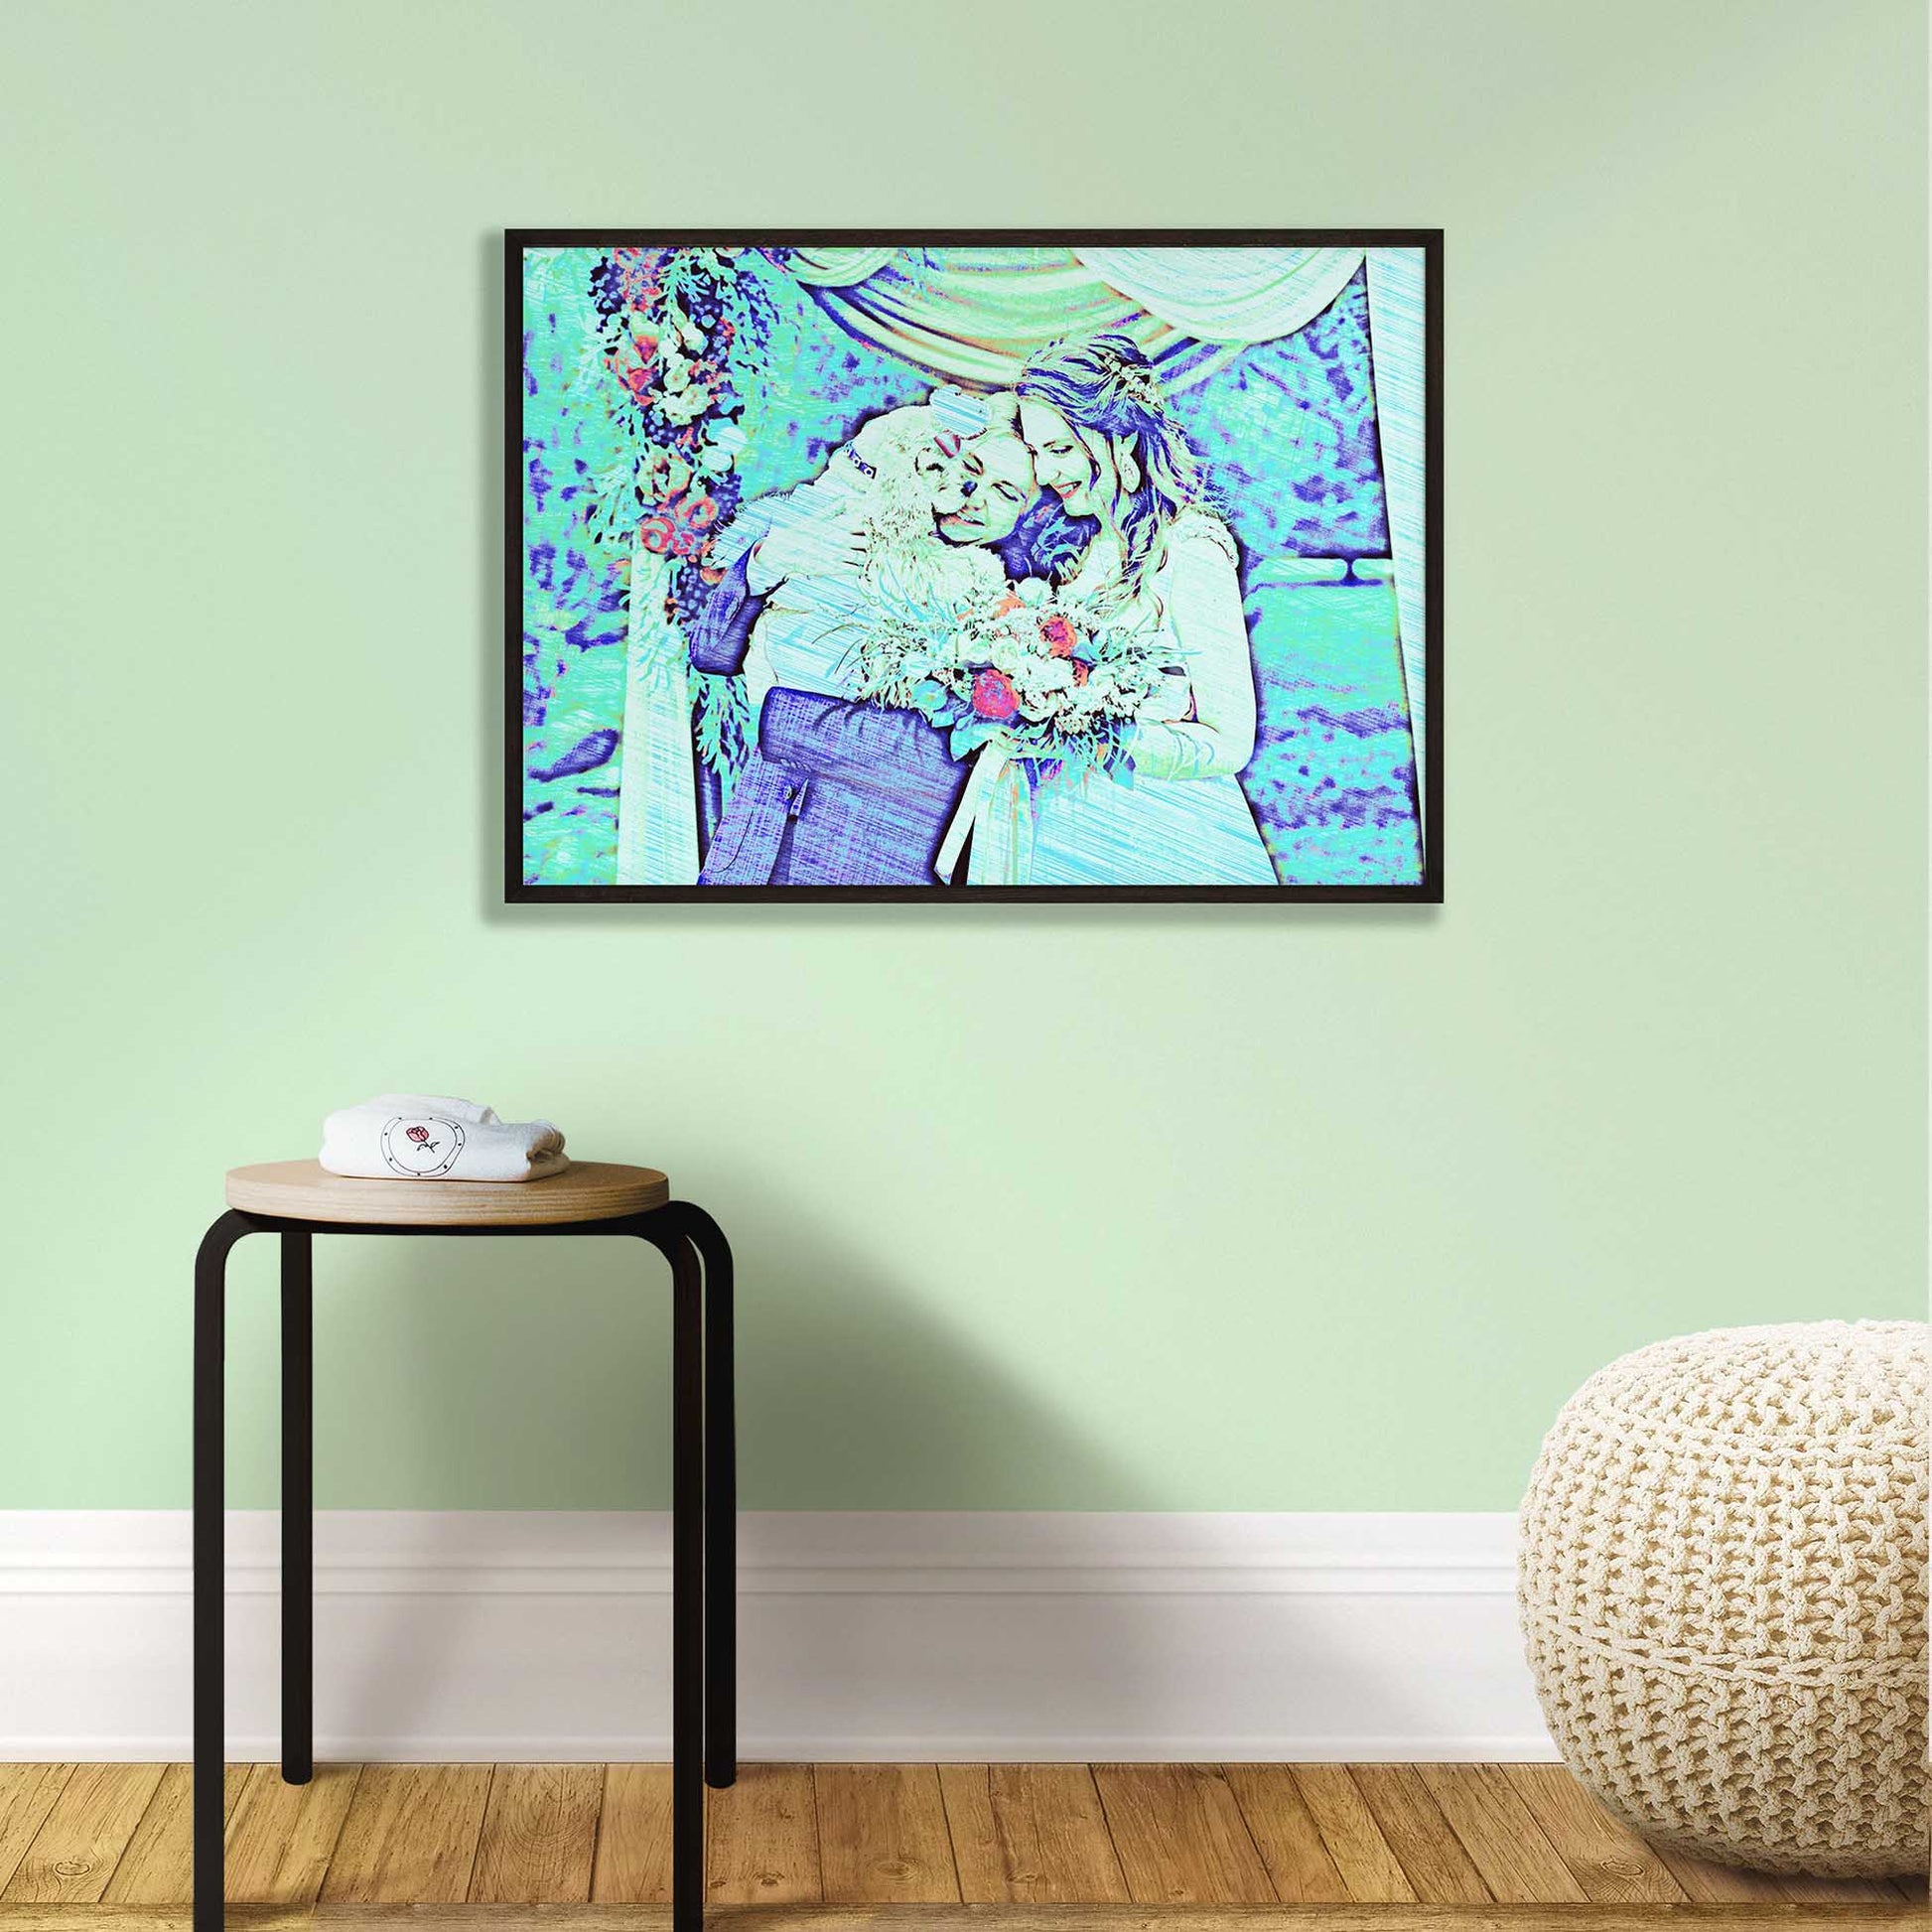 Make a statement with a Personalised Blue Drawing Framed Print. The pencil effect adds a fresh and artistic touch, making it a novelty and unique choice for your home, office, or as a gift. Its cool and quirky design brings a sense of creativity